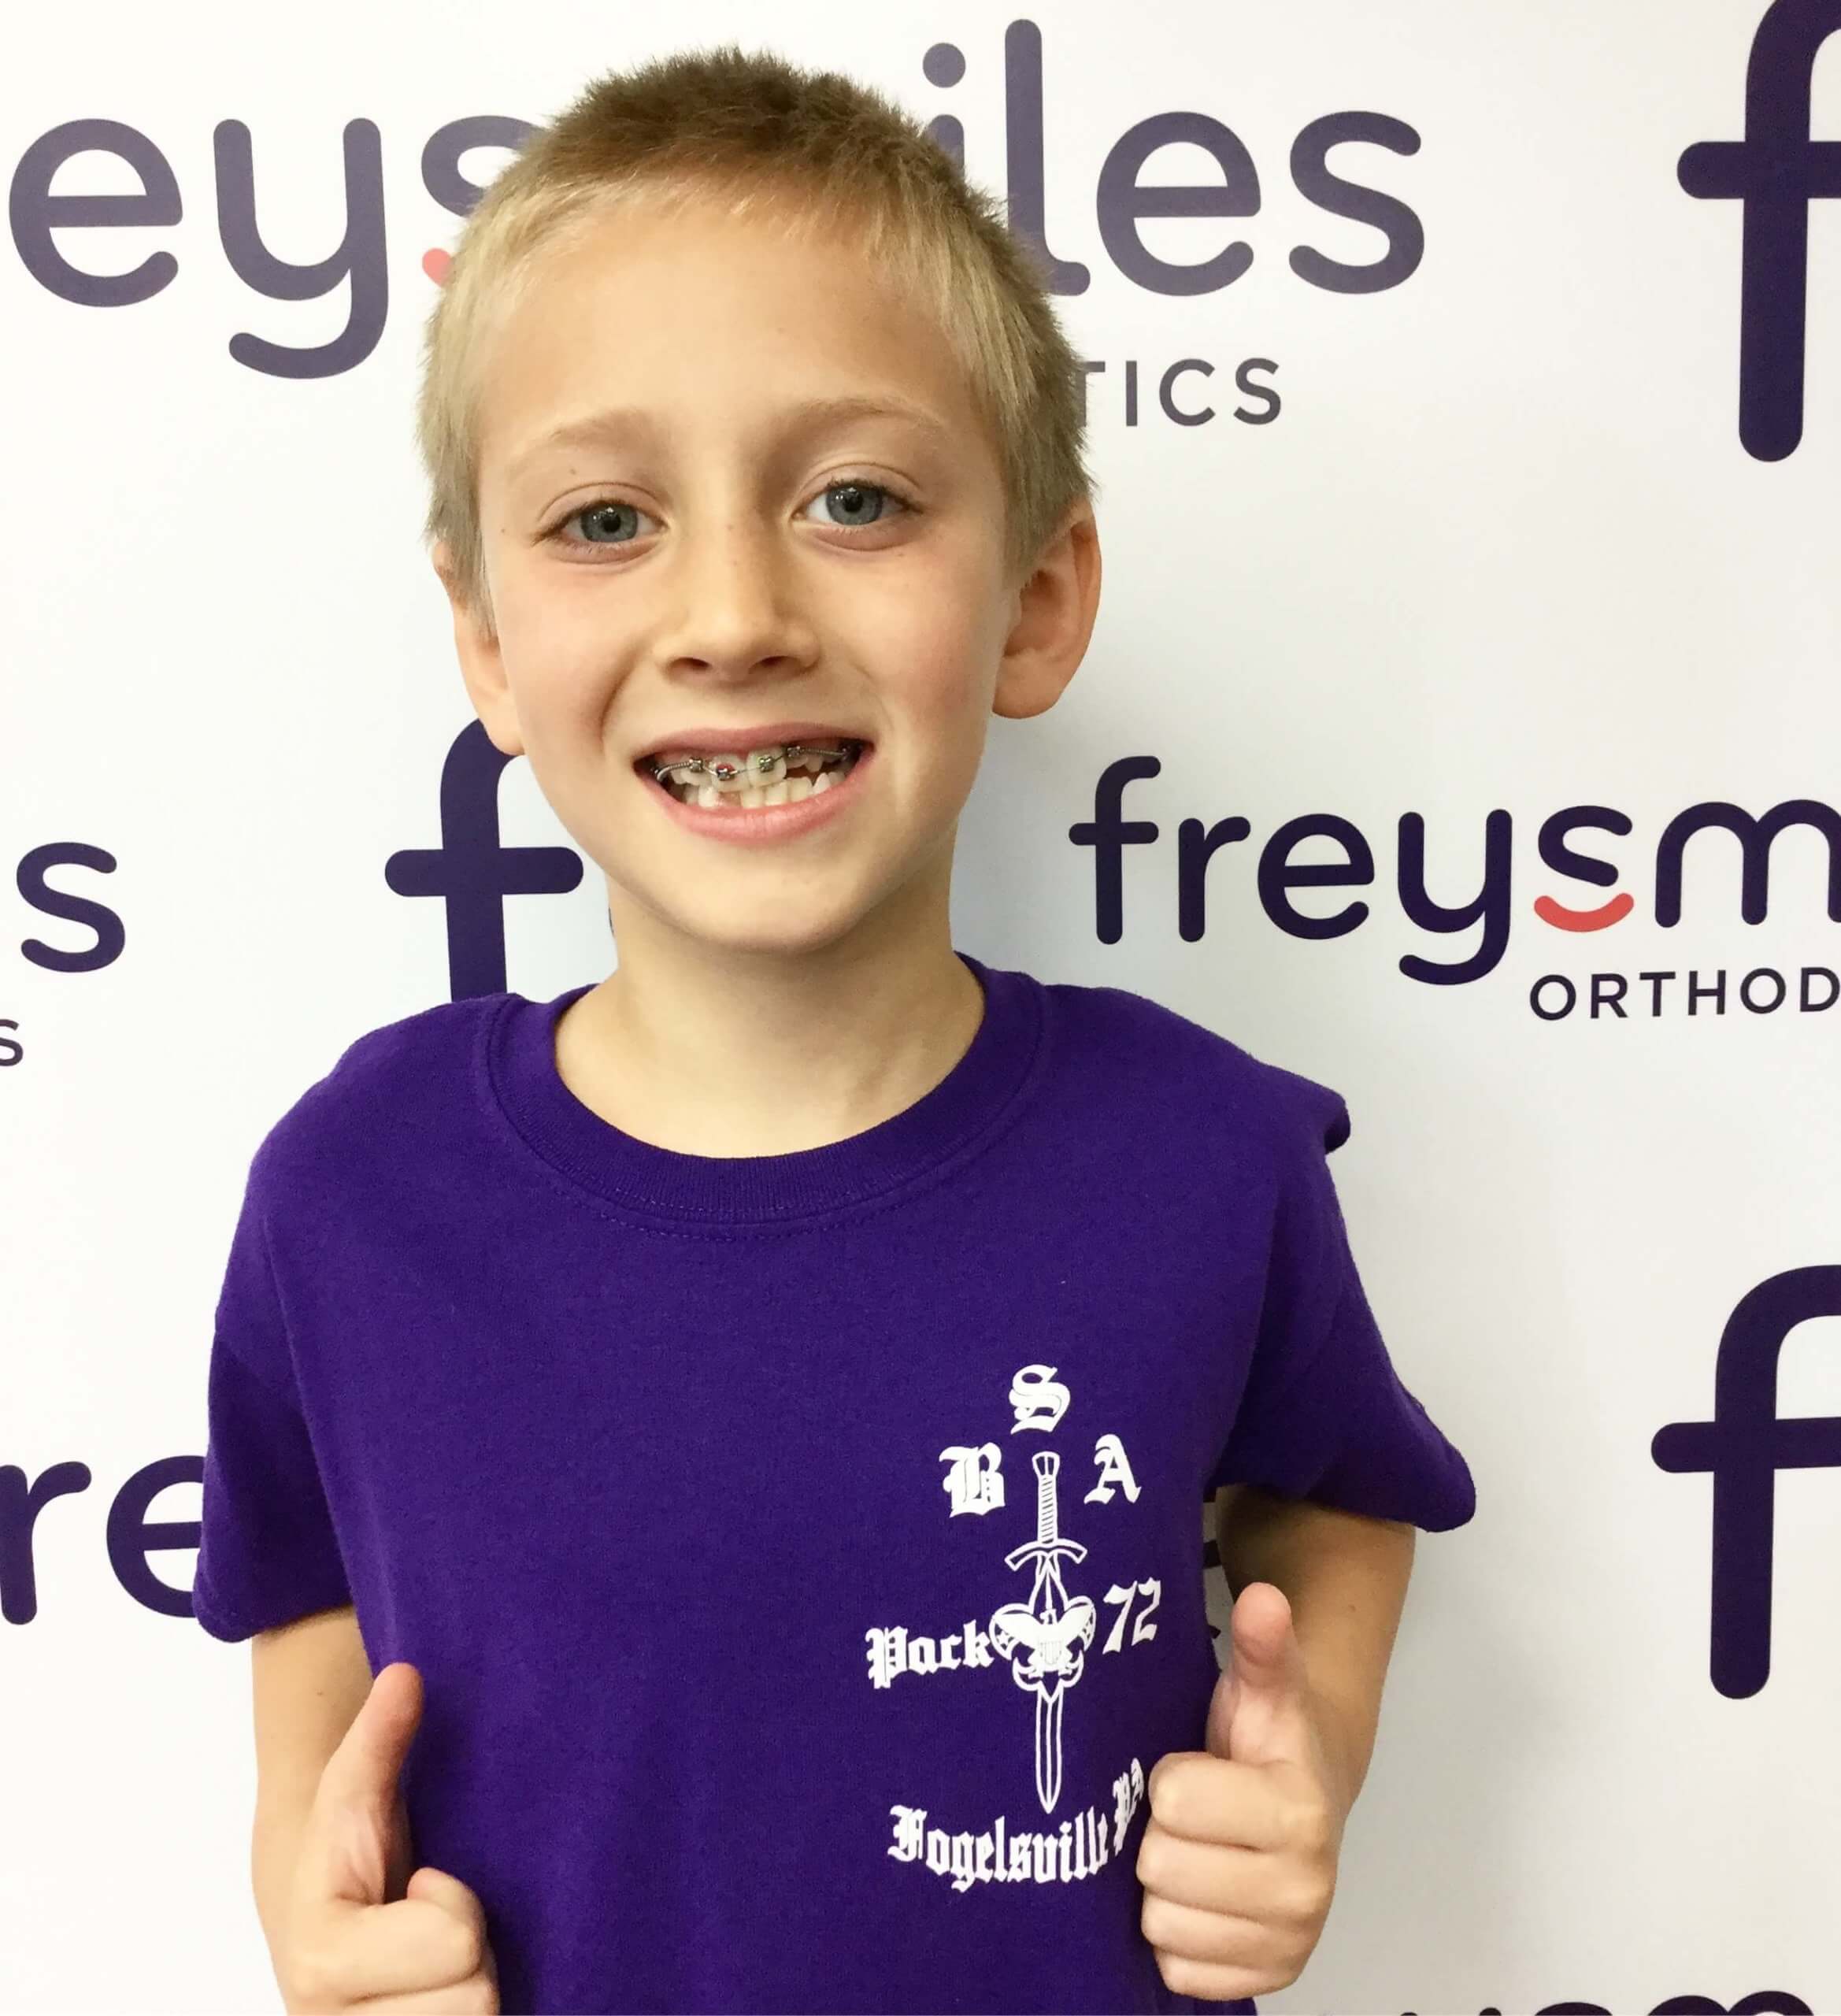 A little boy with braces smiles and gives thumbs up